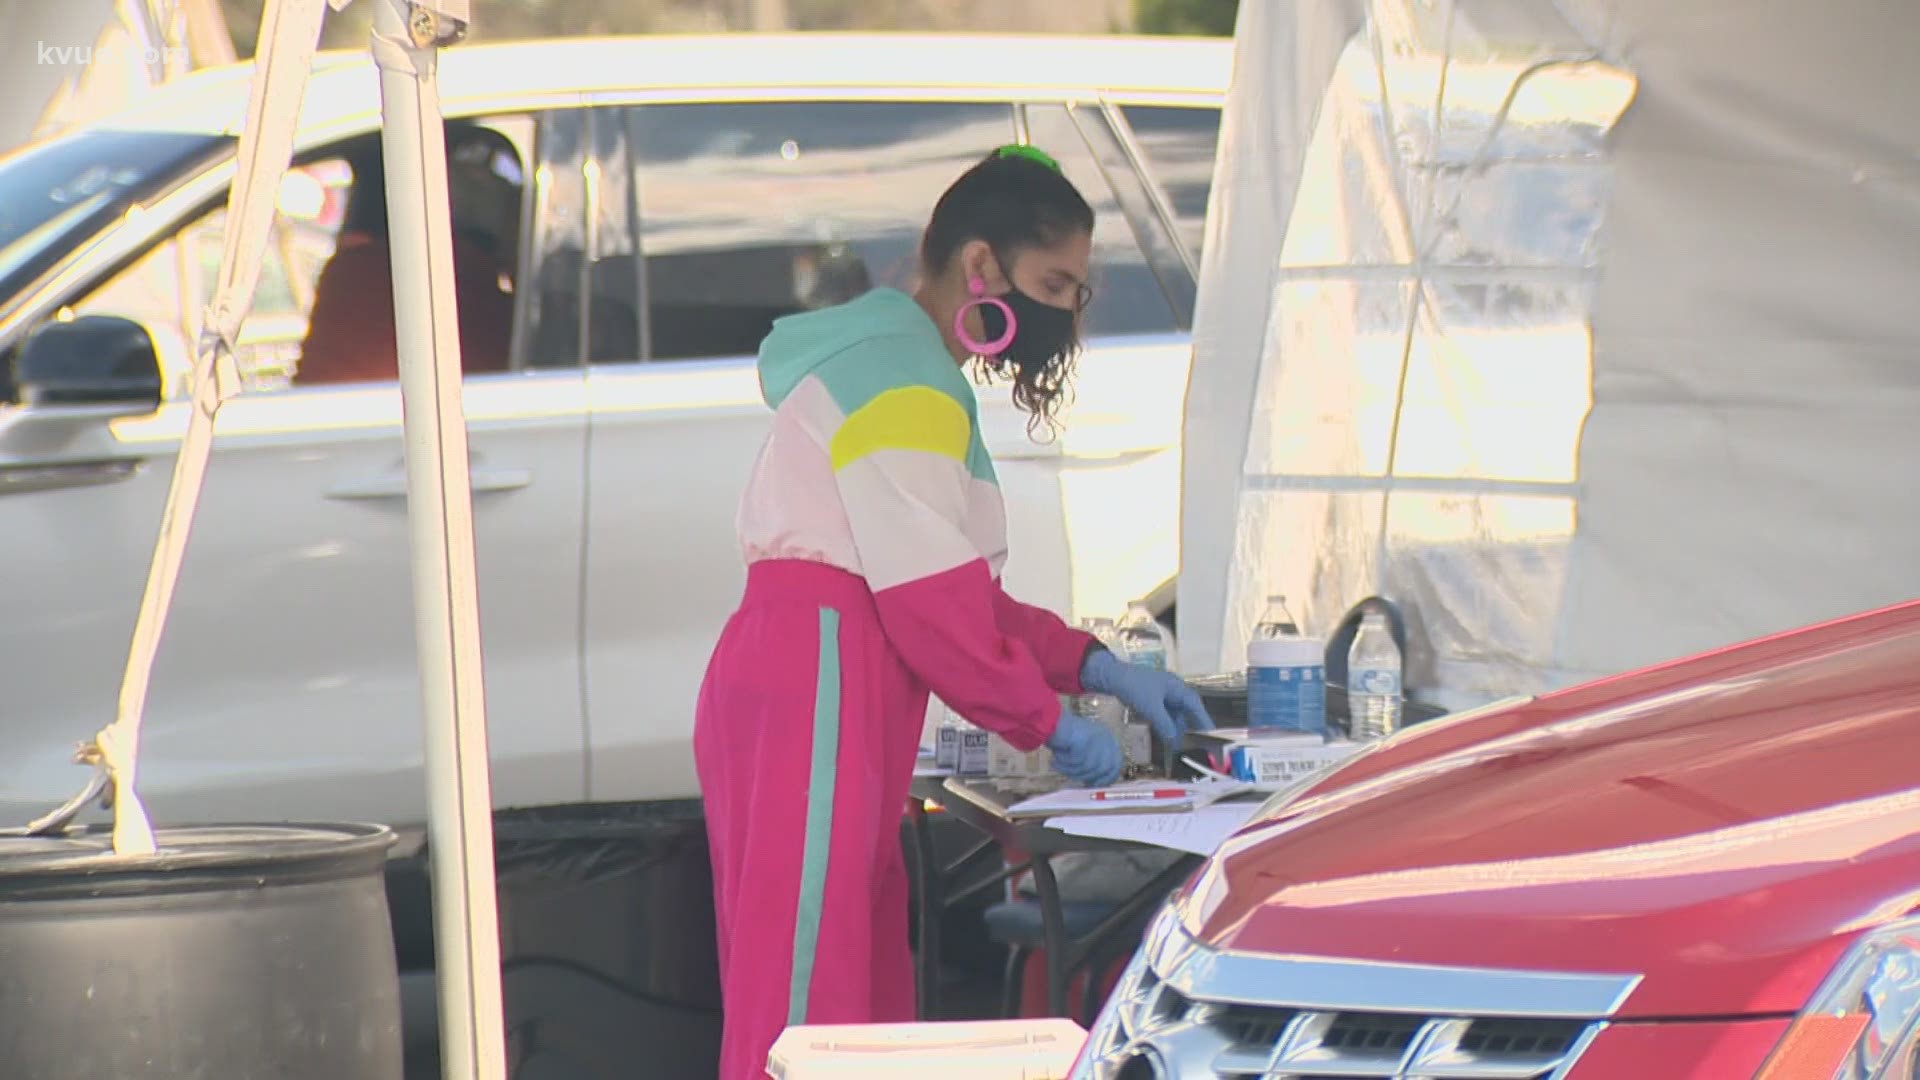 A 24-hour COVID-19 'vax-a-thon' in Williamson County added an element of '80s-themed fun. The drive-thru event is appointment only.